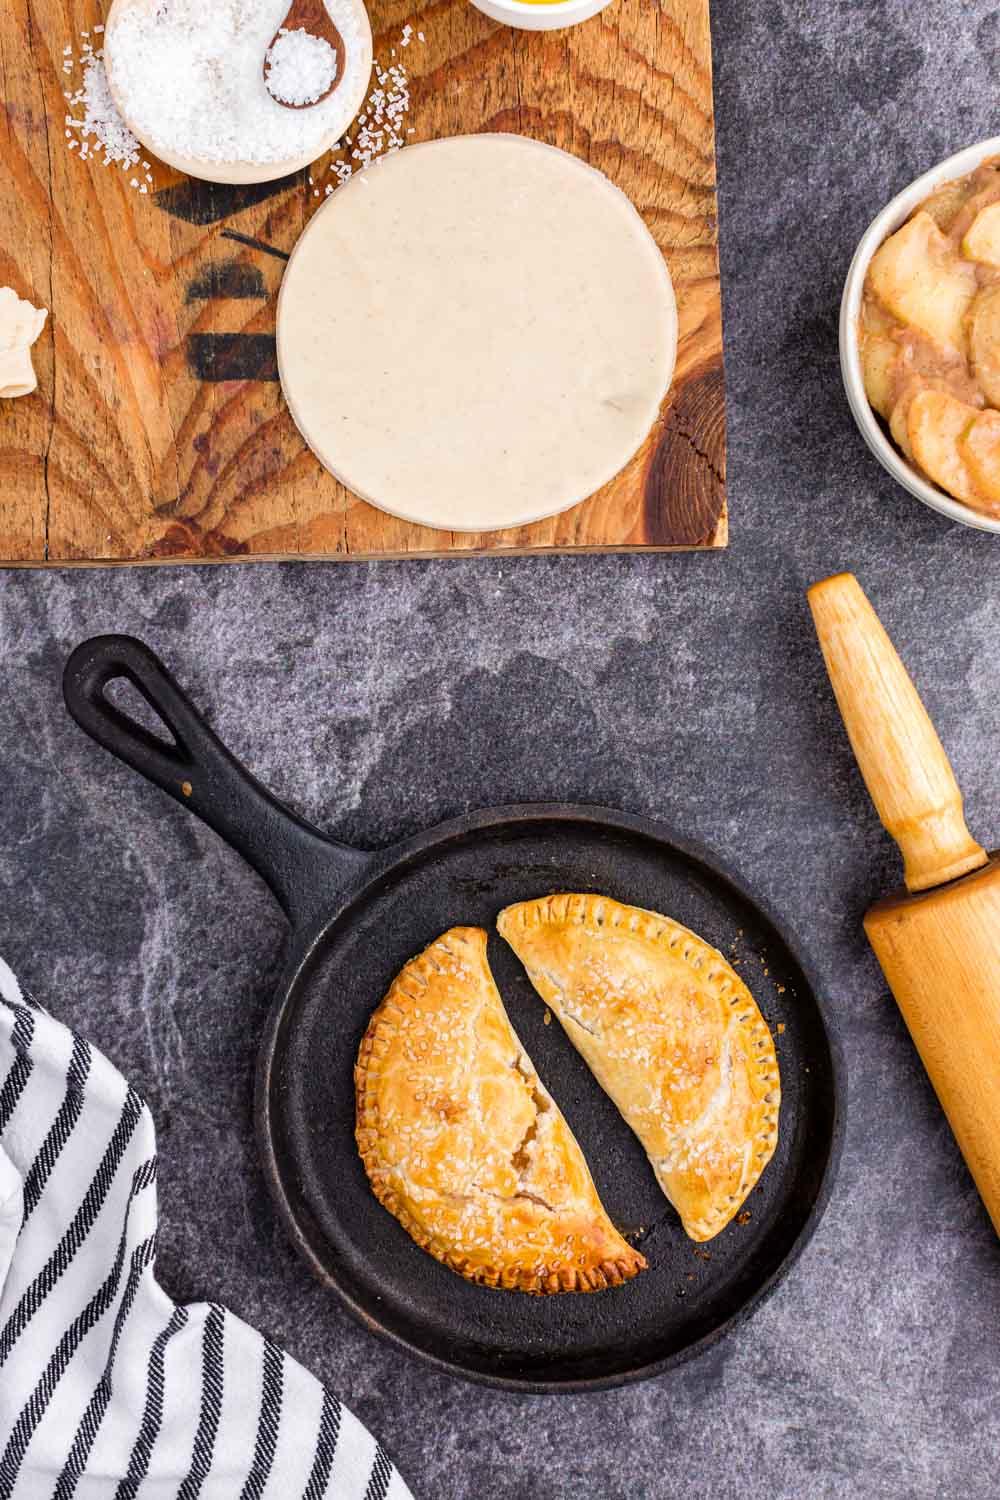 Iron skillet with two baked apple hand pies, pin roll, one unbaked pie crust circle on wooden kitchen board, bowl of sugar, bowl of apple pie filling, striped linen on black countertop